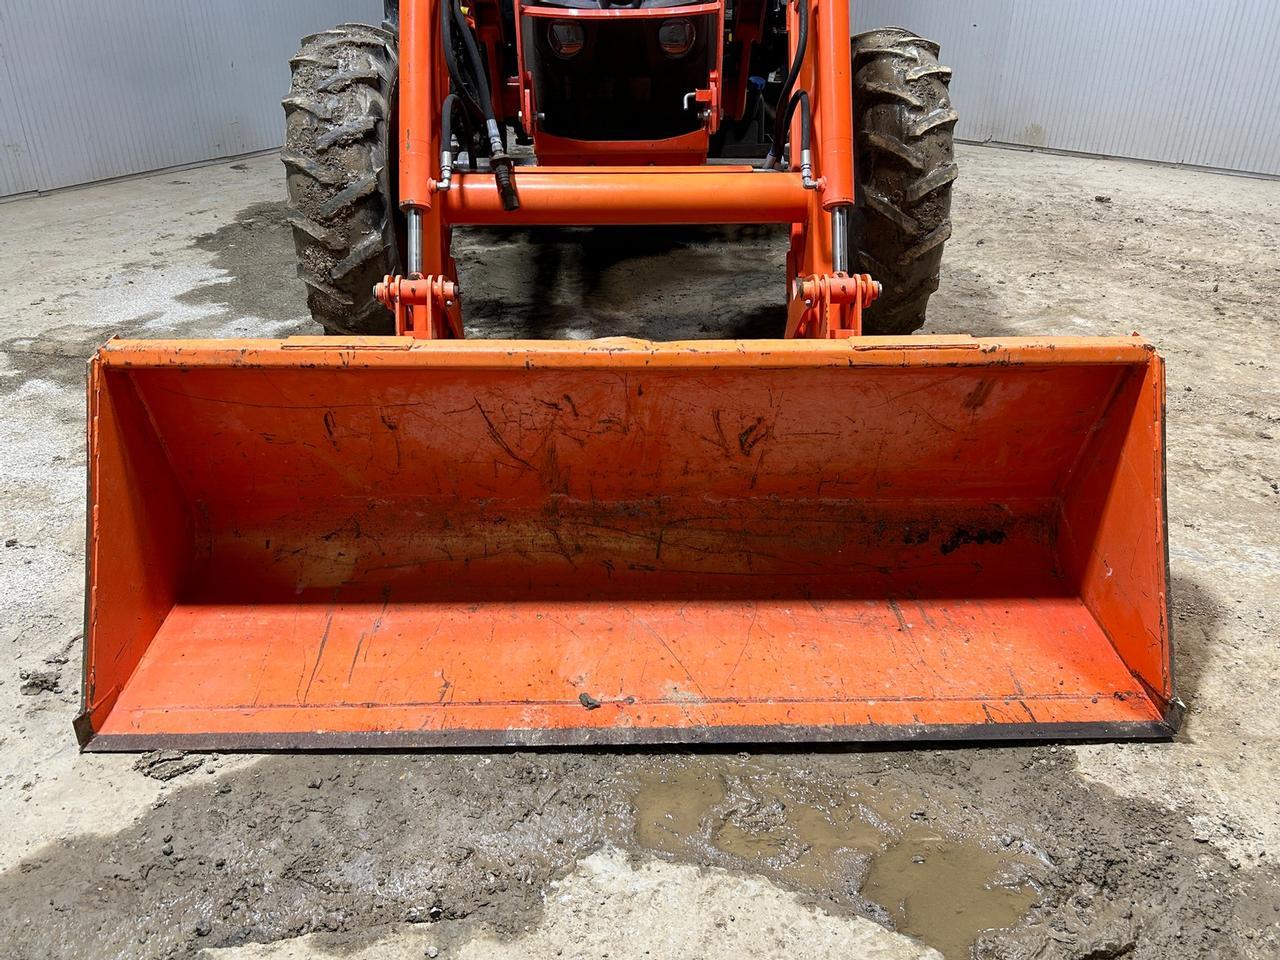 2015 Kubota M5-111D Tractor with Loader